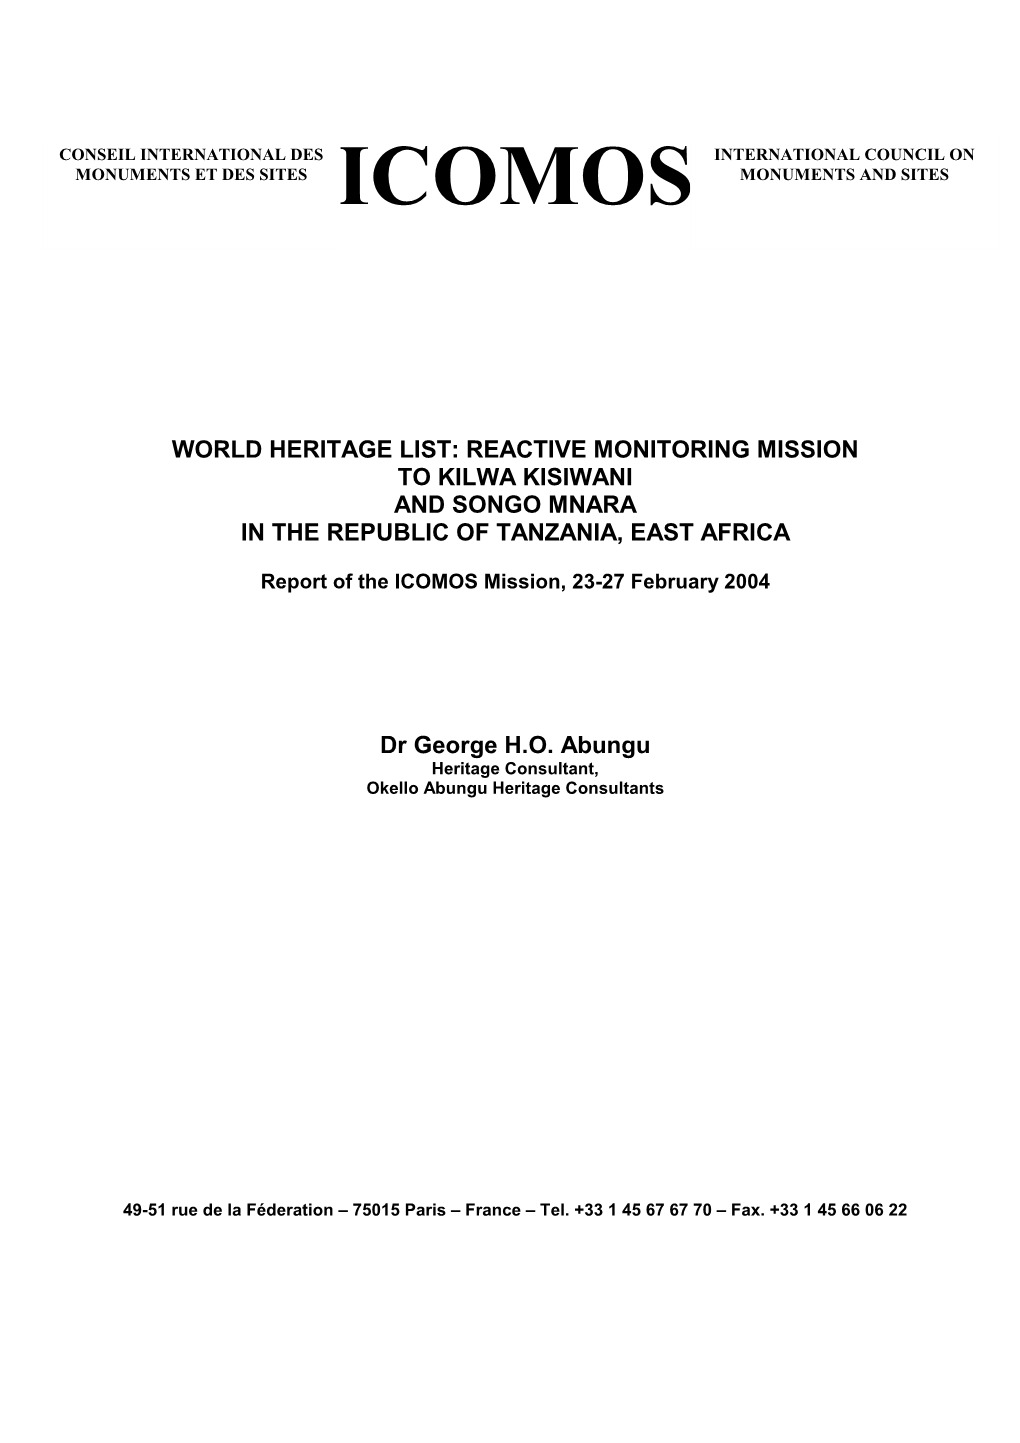 Reactive Monitoring Mission to Kilwa Kisiwani and Songo Mnara in the Republic of Tanzania, East Africa